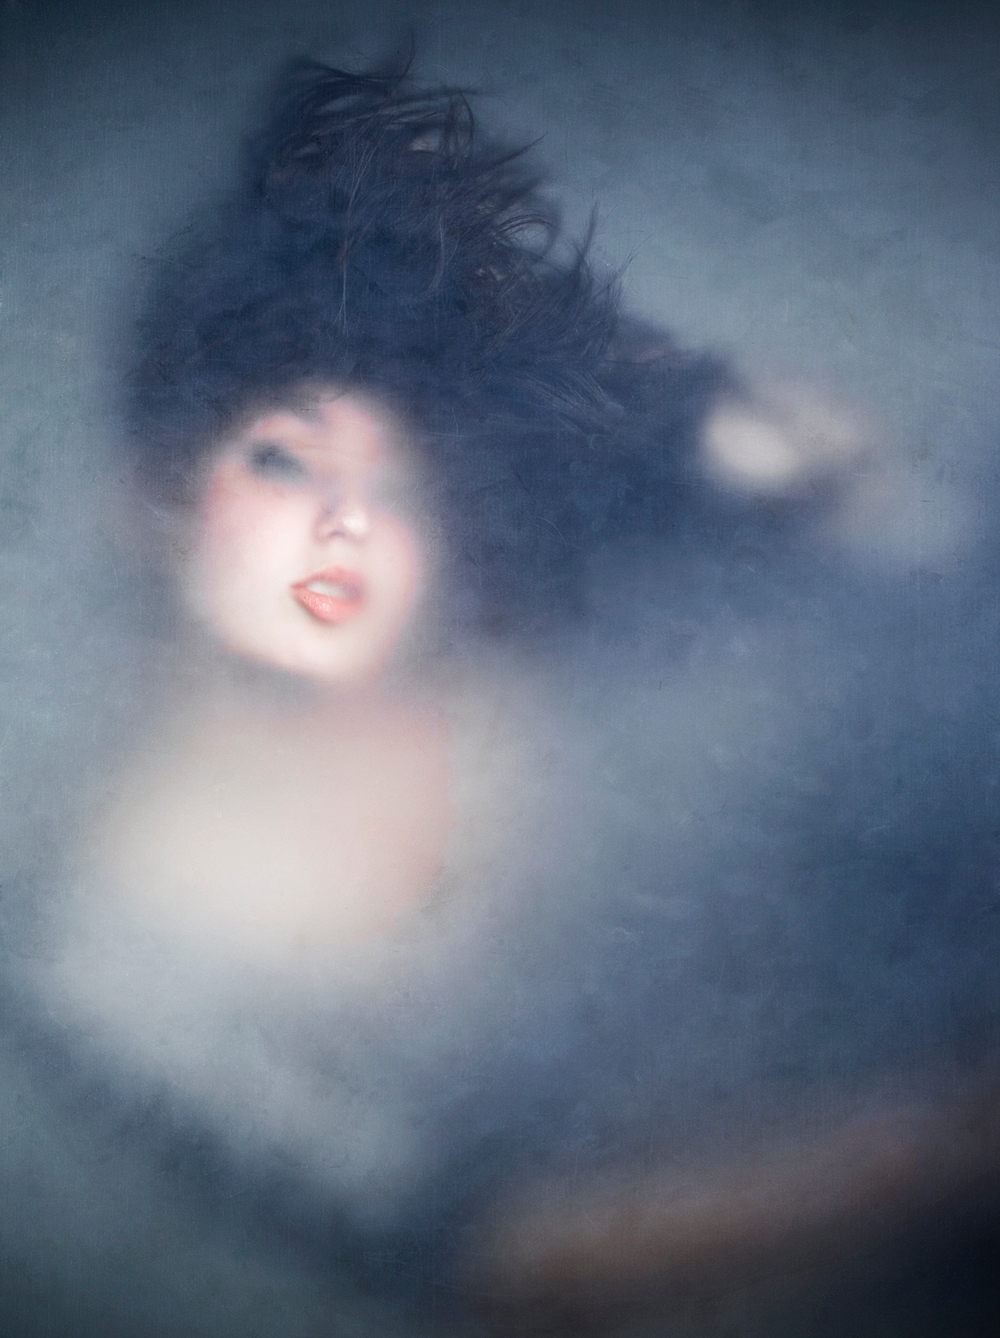 Underwater photography - Image by Erin Mulvehill